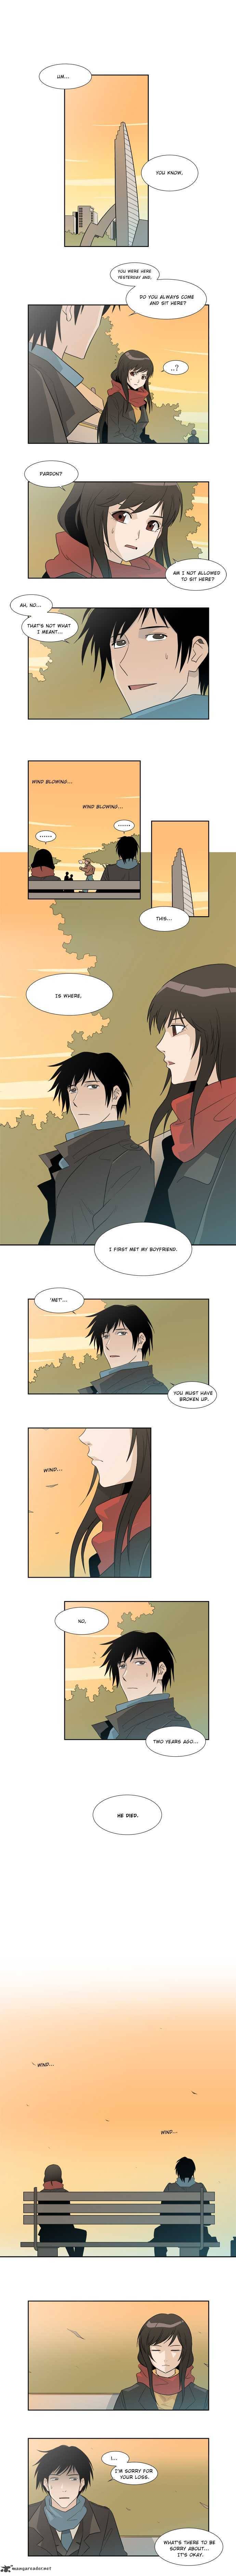 Melo Holic Chapter 4 Page 2